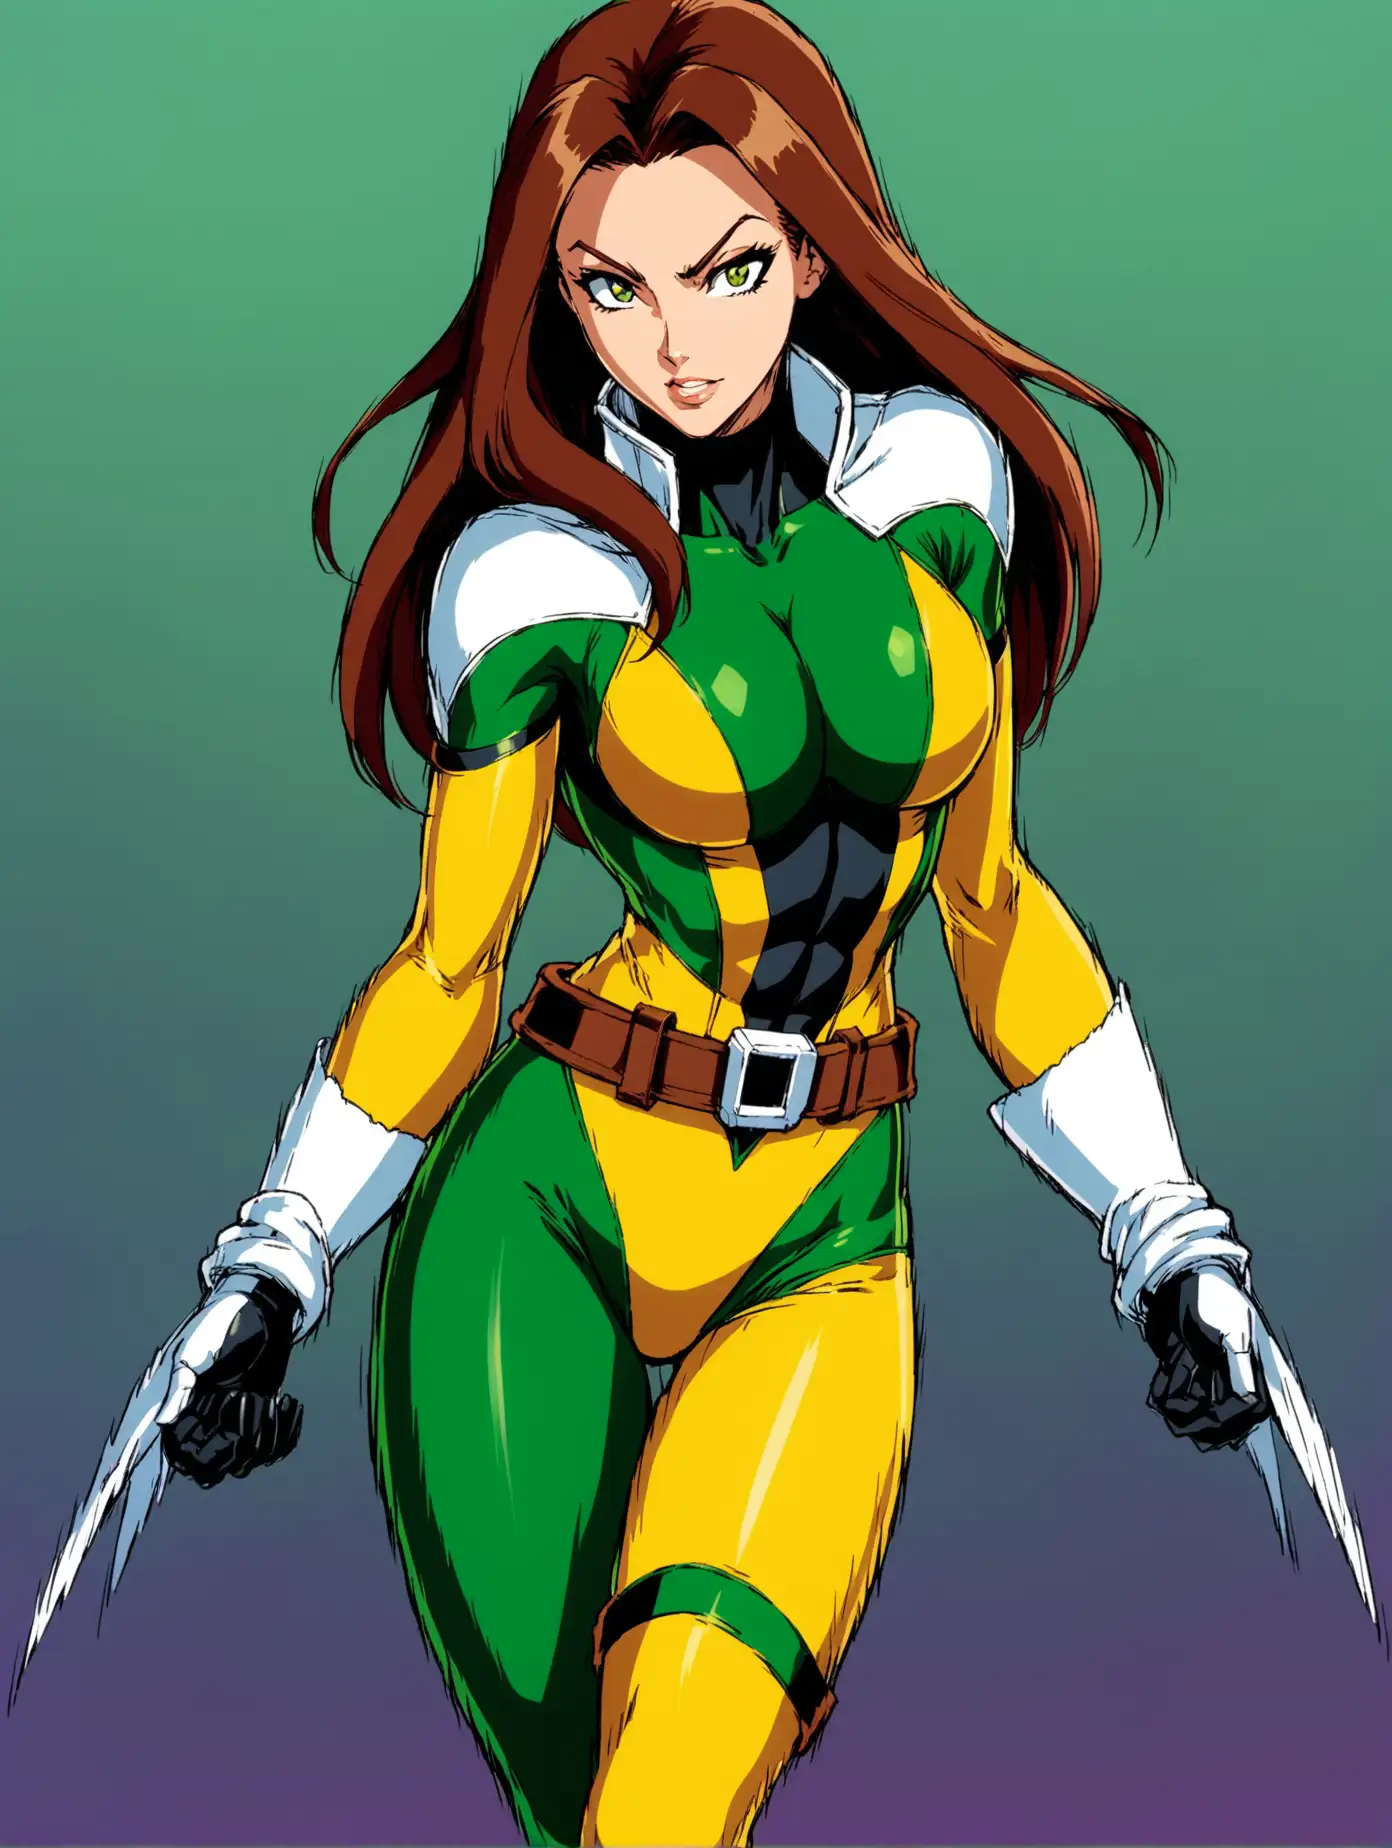 Rogue from XMen Animated Series in Intense Action